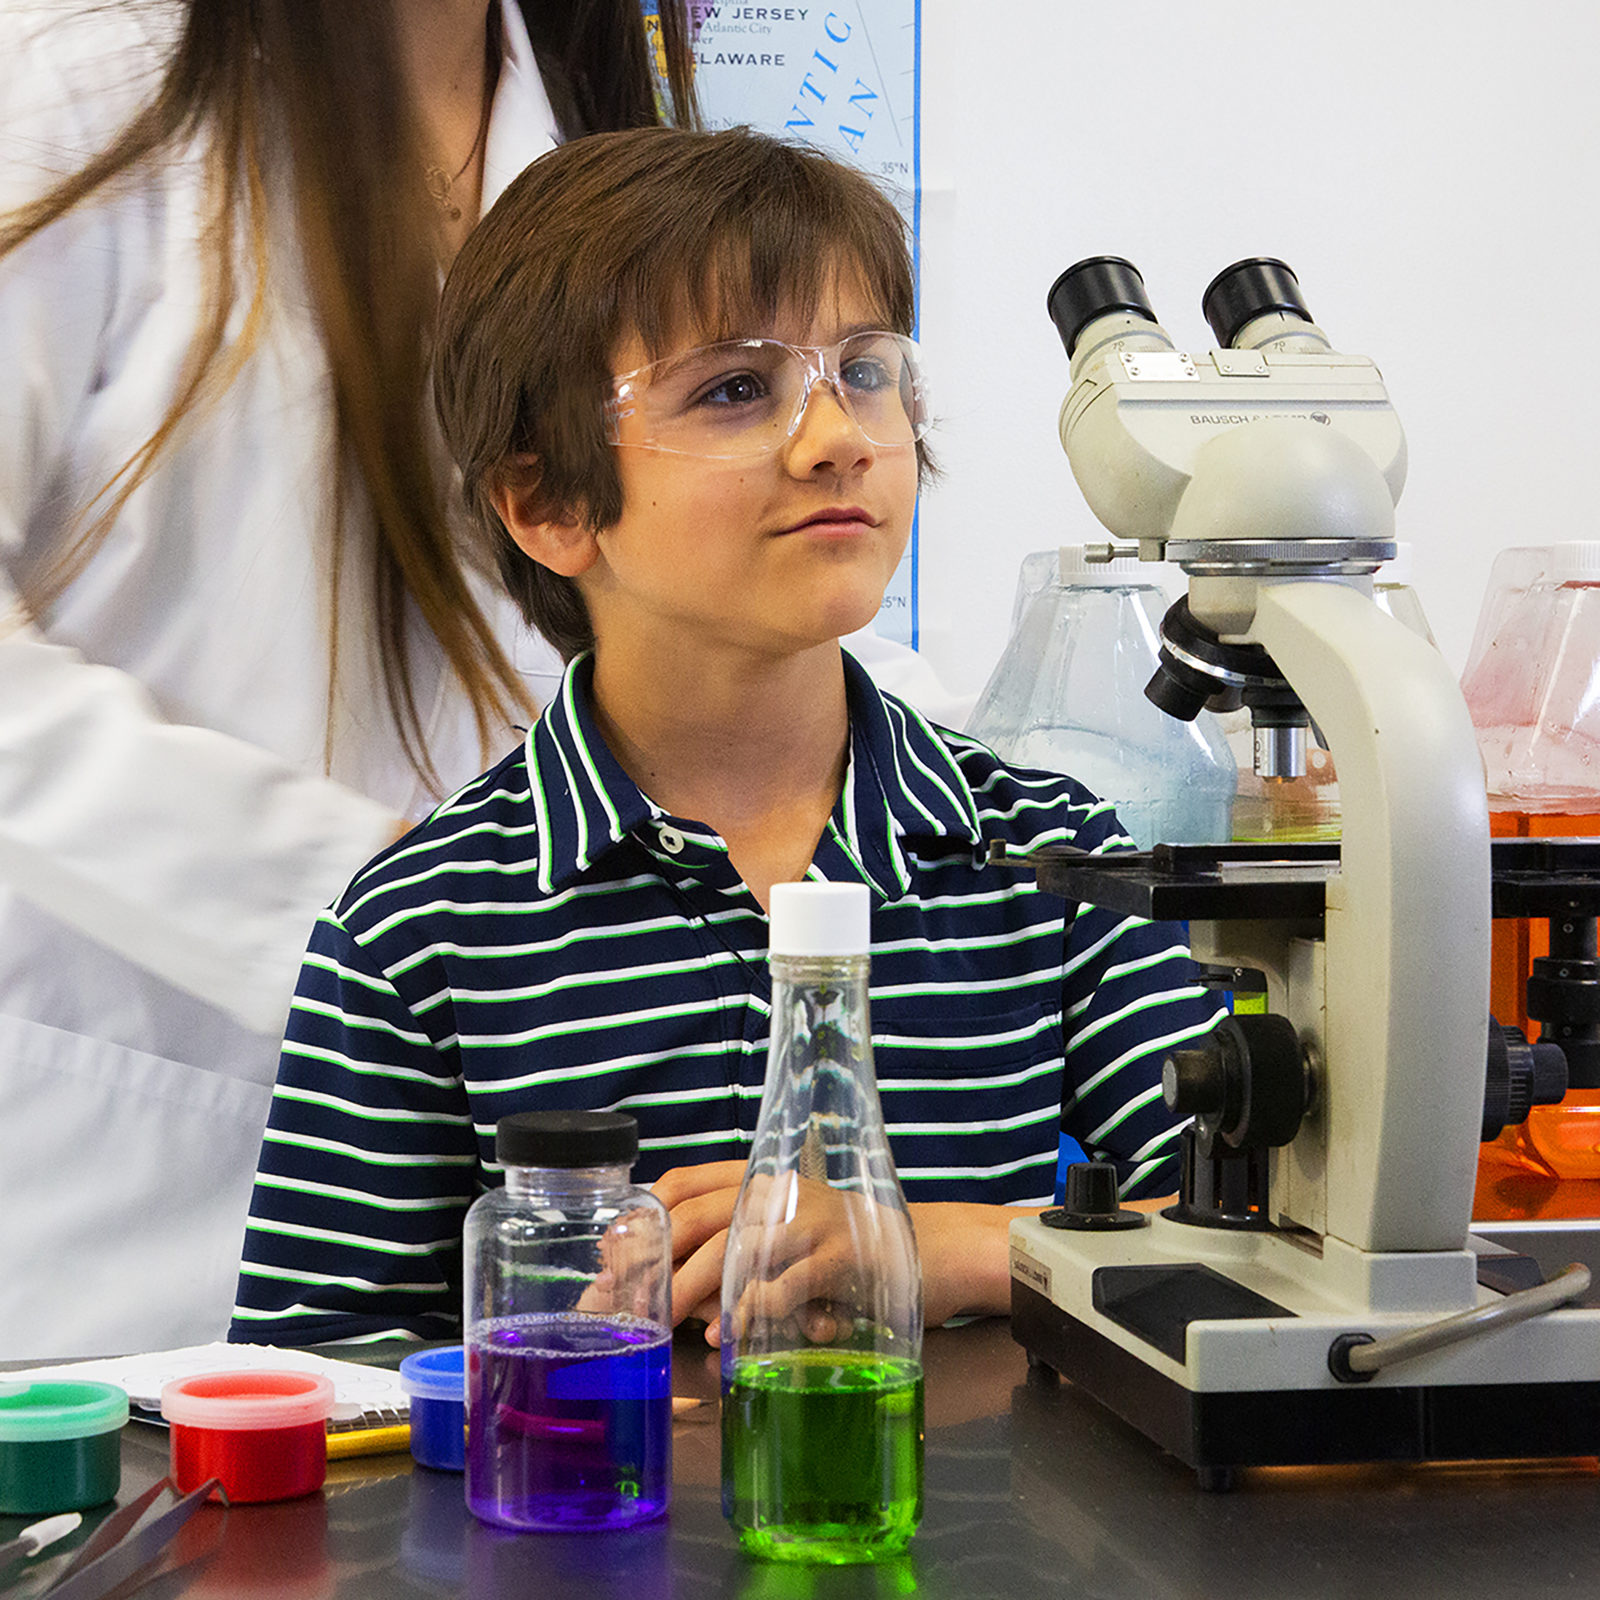 A boy wearing clear children's JORESTECH safety glasses for high impact in a lab setting. He is using a microscope and has a wide number of bottles with bright colored liquids to be examined. His teacher is in the background.